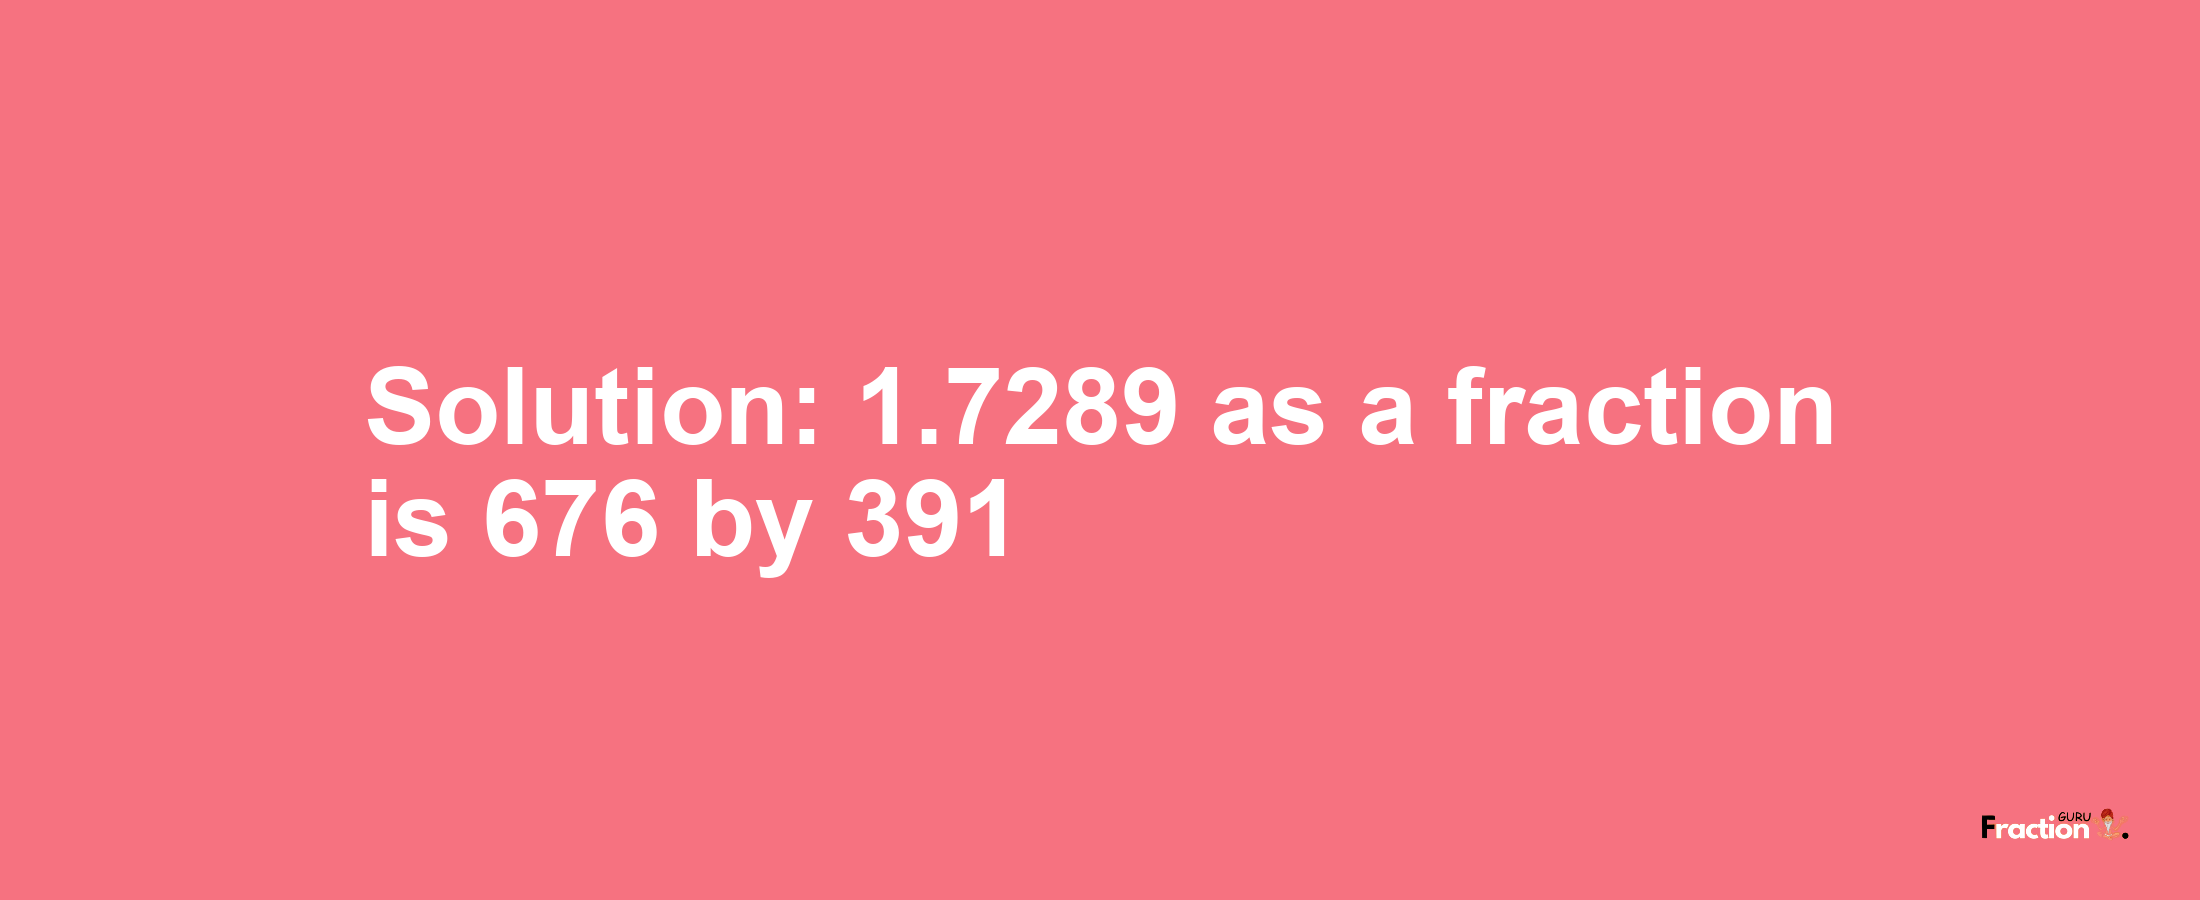 Solution:1.7289 as a fraction is 676/391